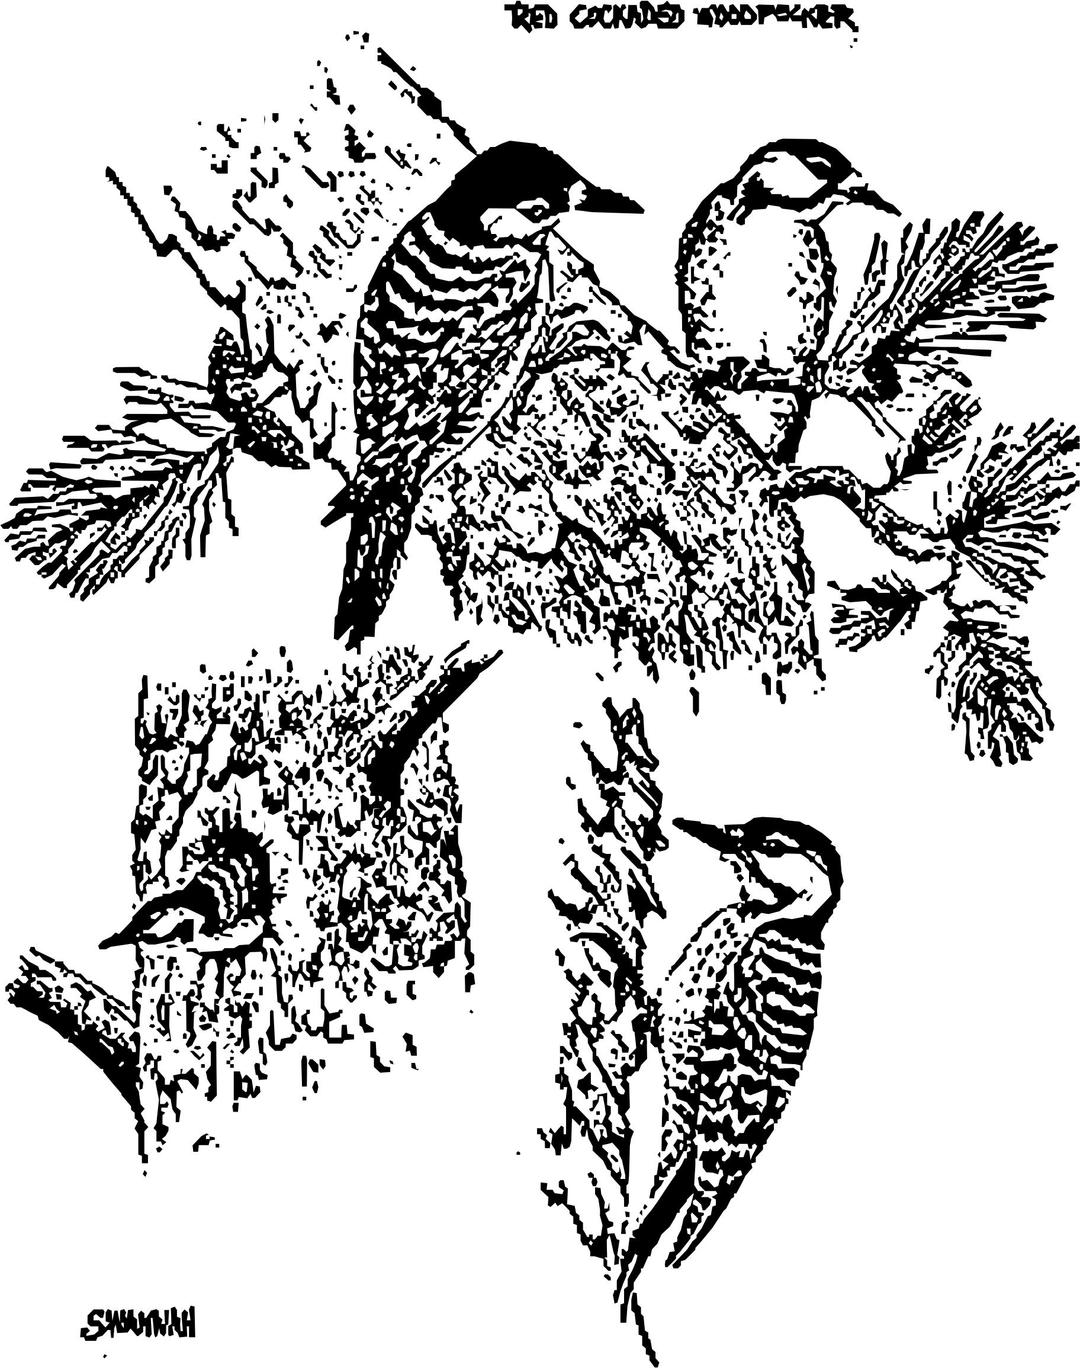 red cockaded woodpeckers png transparent